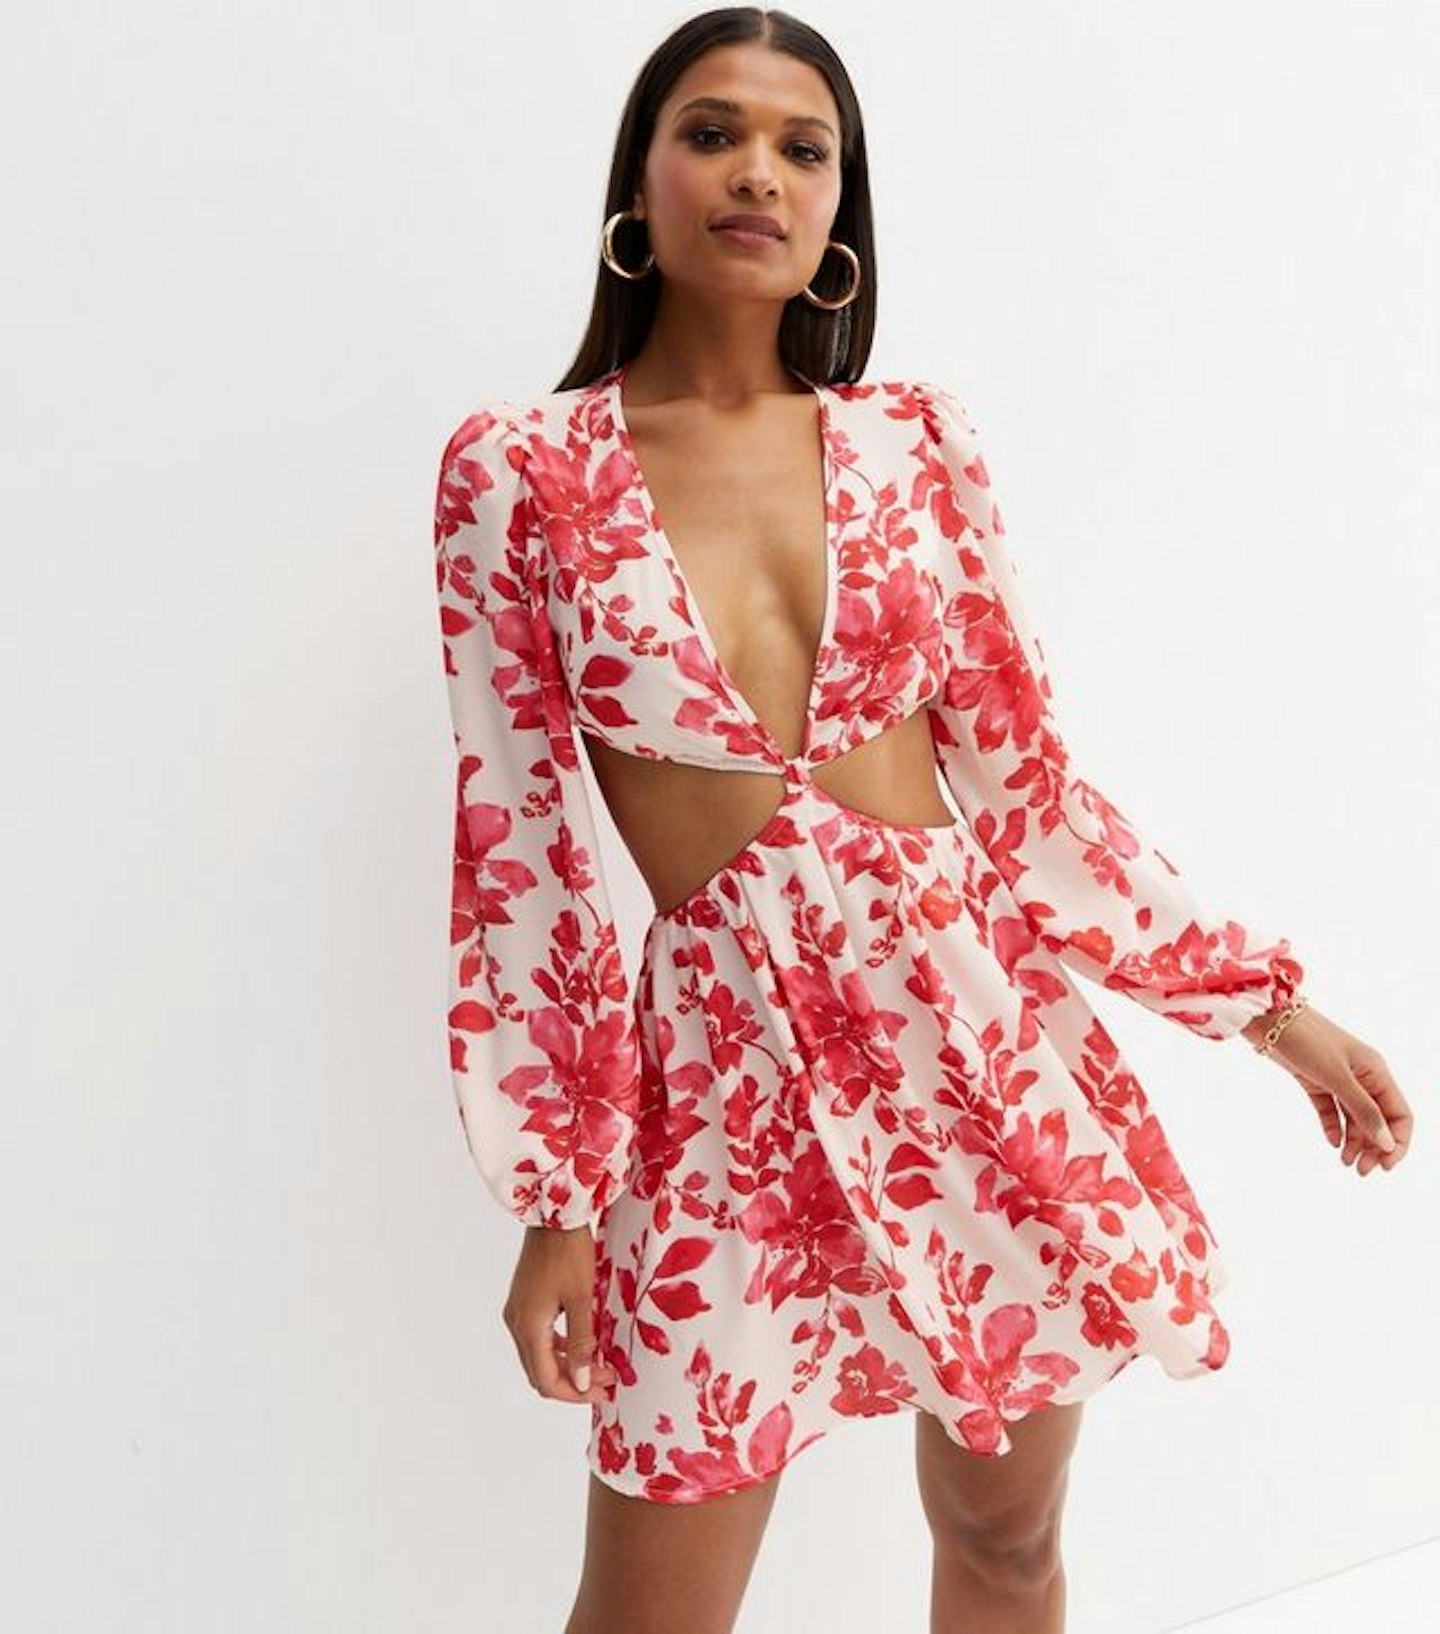 Best Cut Out Dresses 2022: From ASOS to H&M